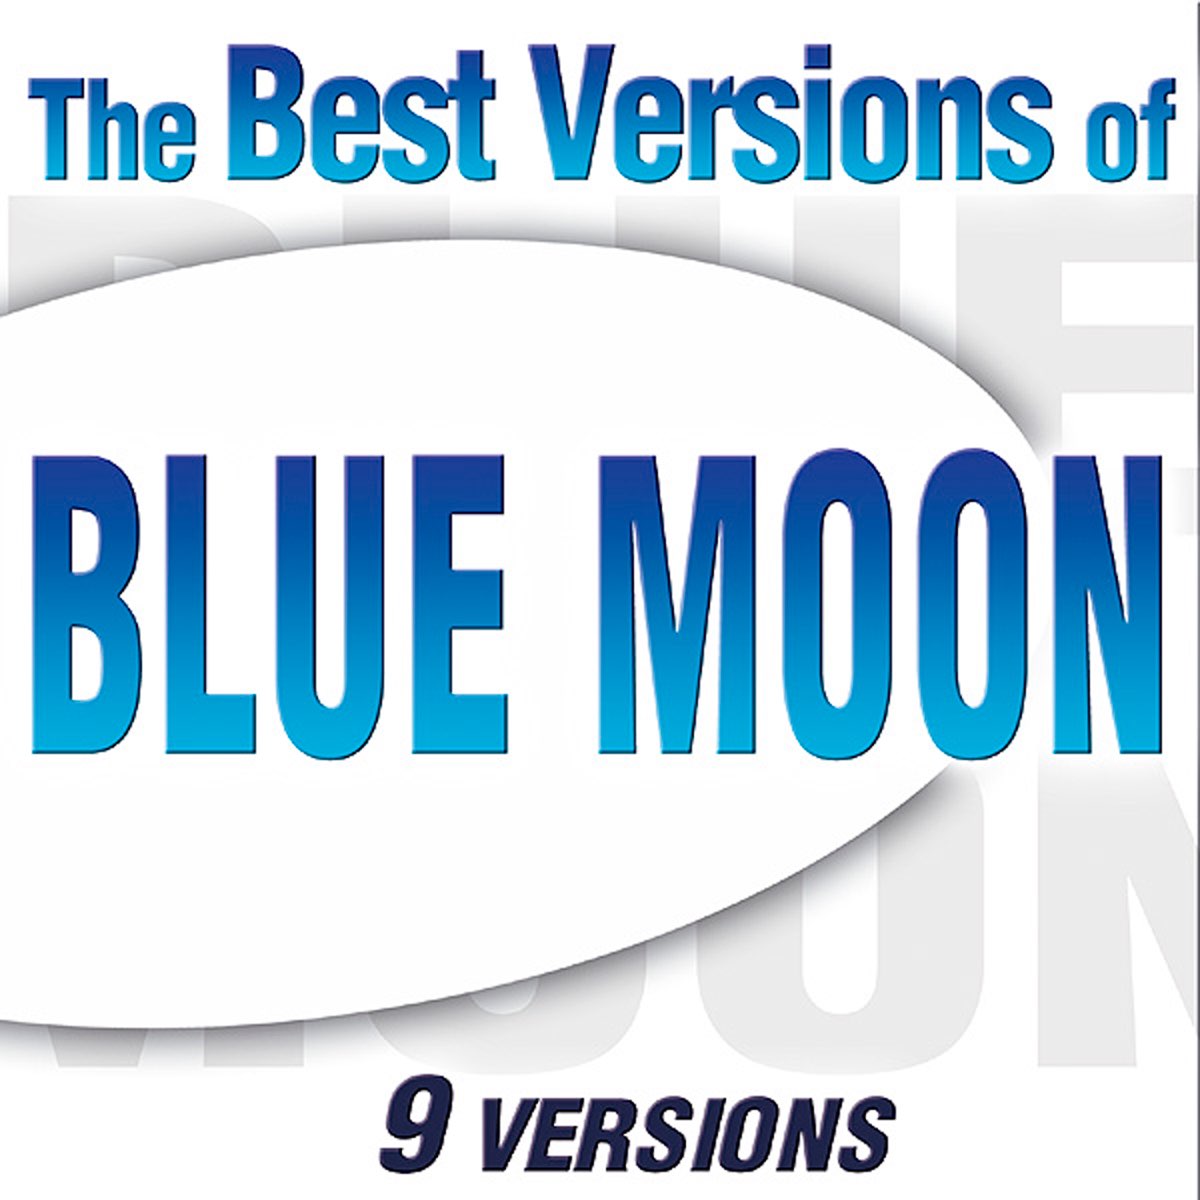 Blue Moon (9 Versions) by Various Artists on Apple Music